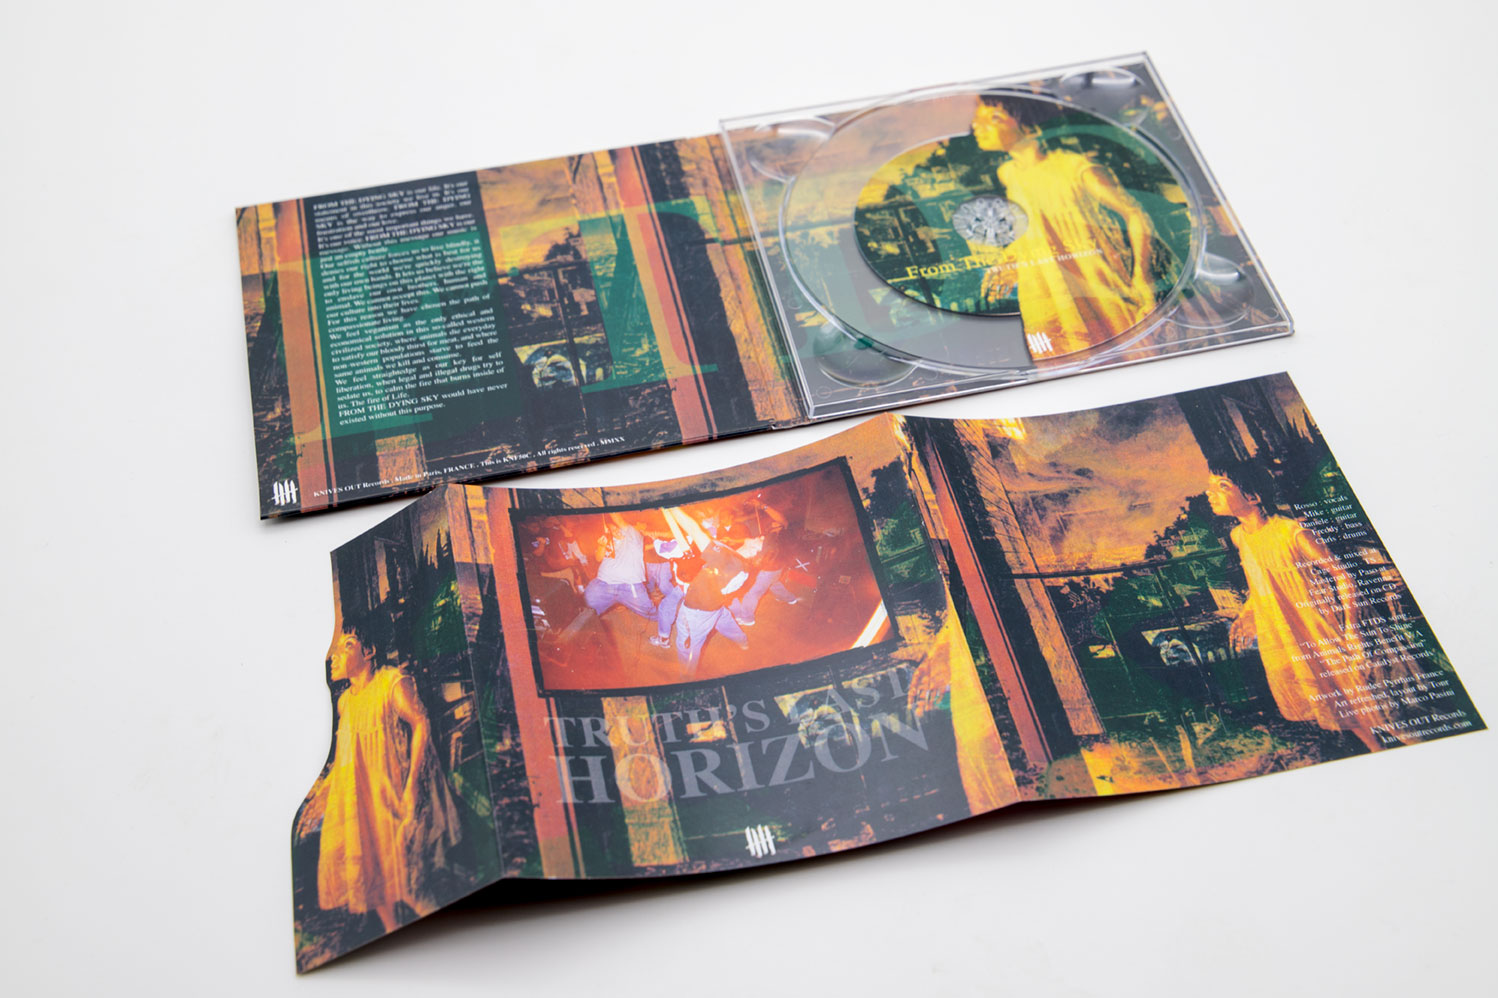 FROM THE DYING SKY "Truth's Last Horizon" Deluxe Digipack clear CD